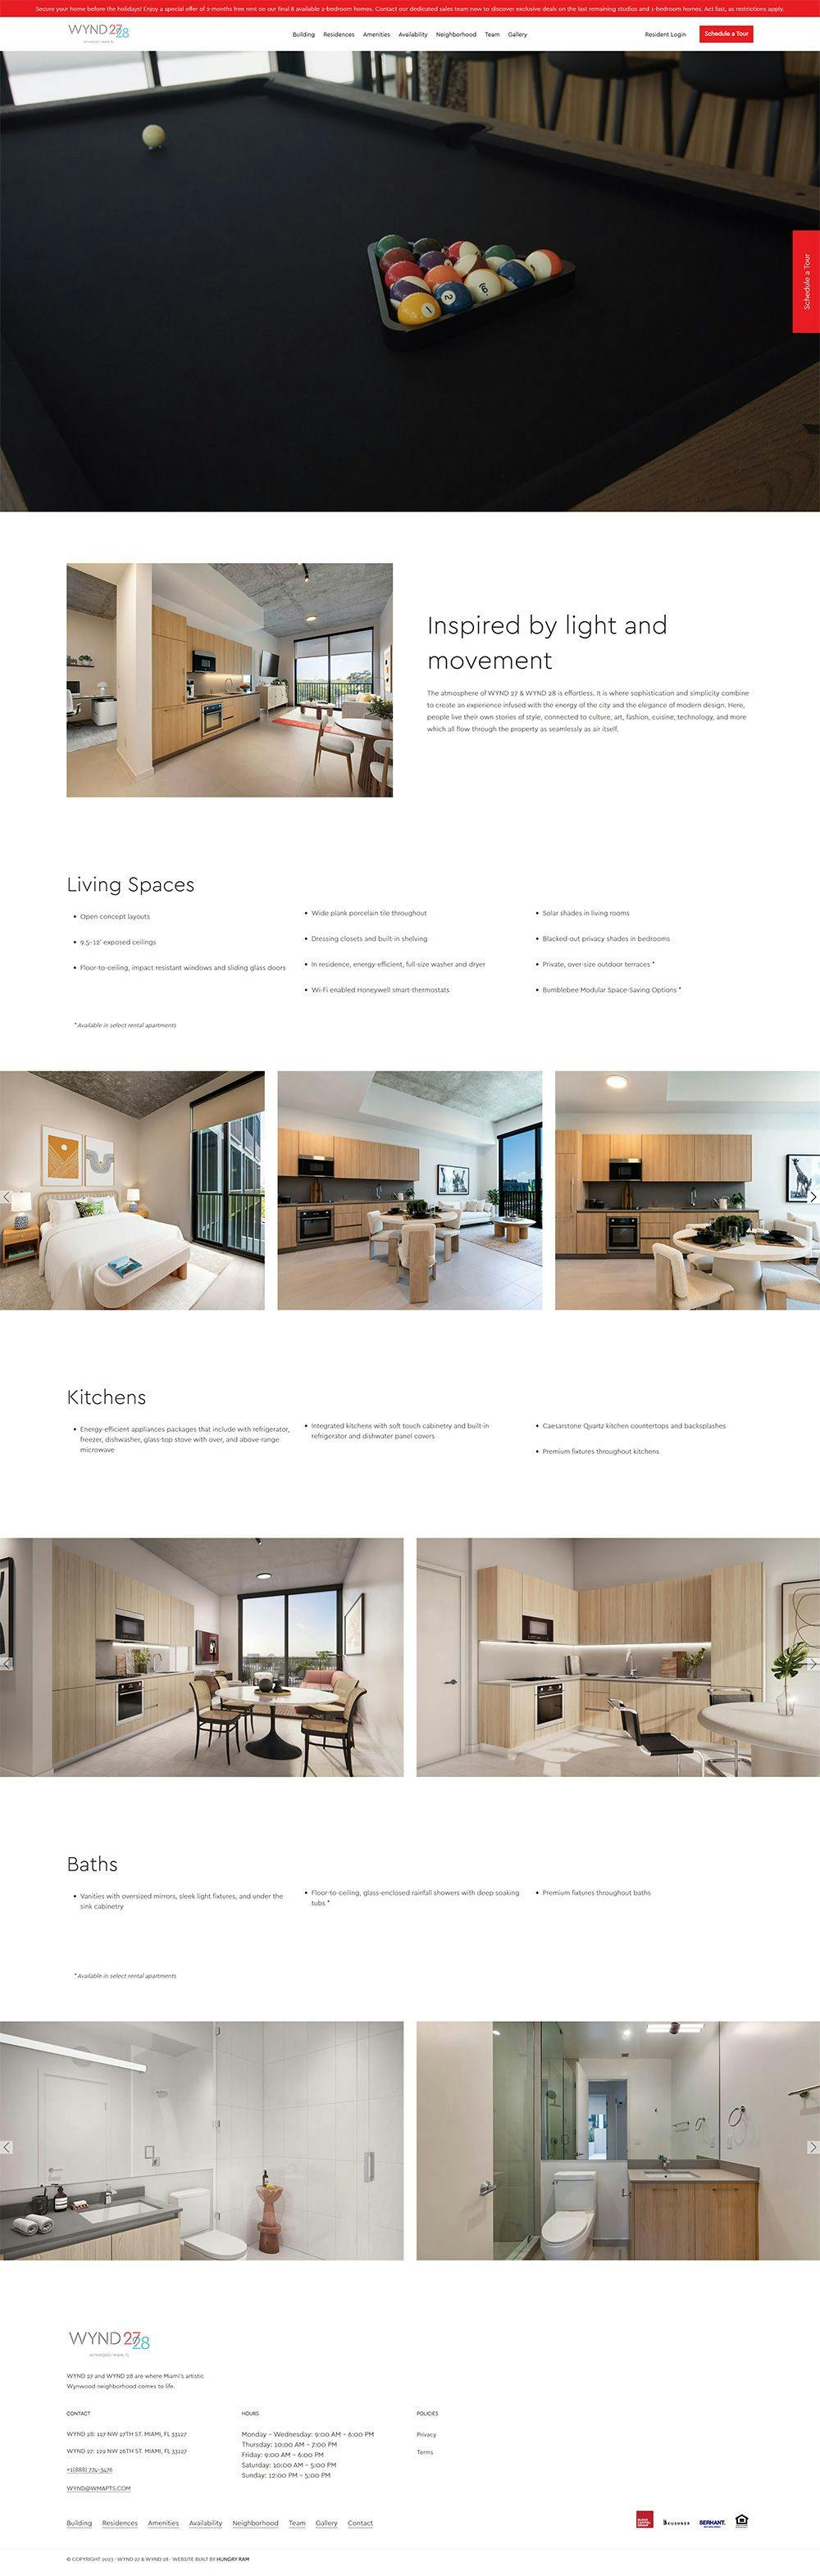 Wynd Miami website design residence page